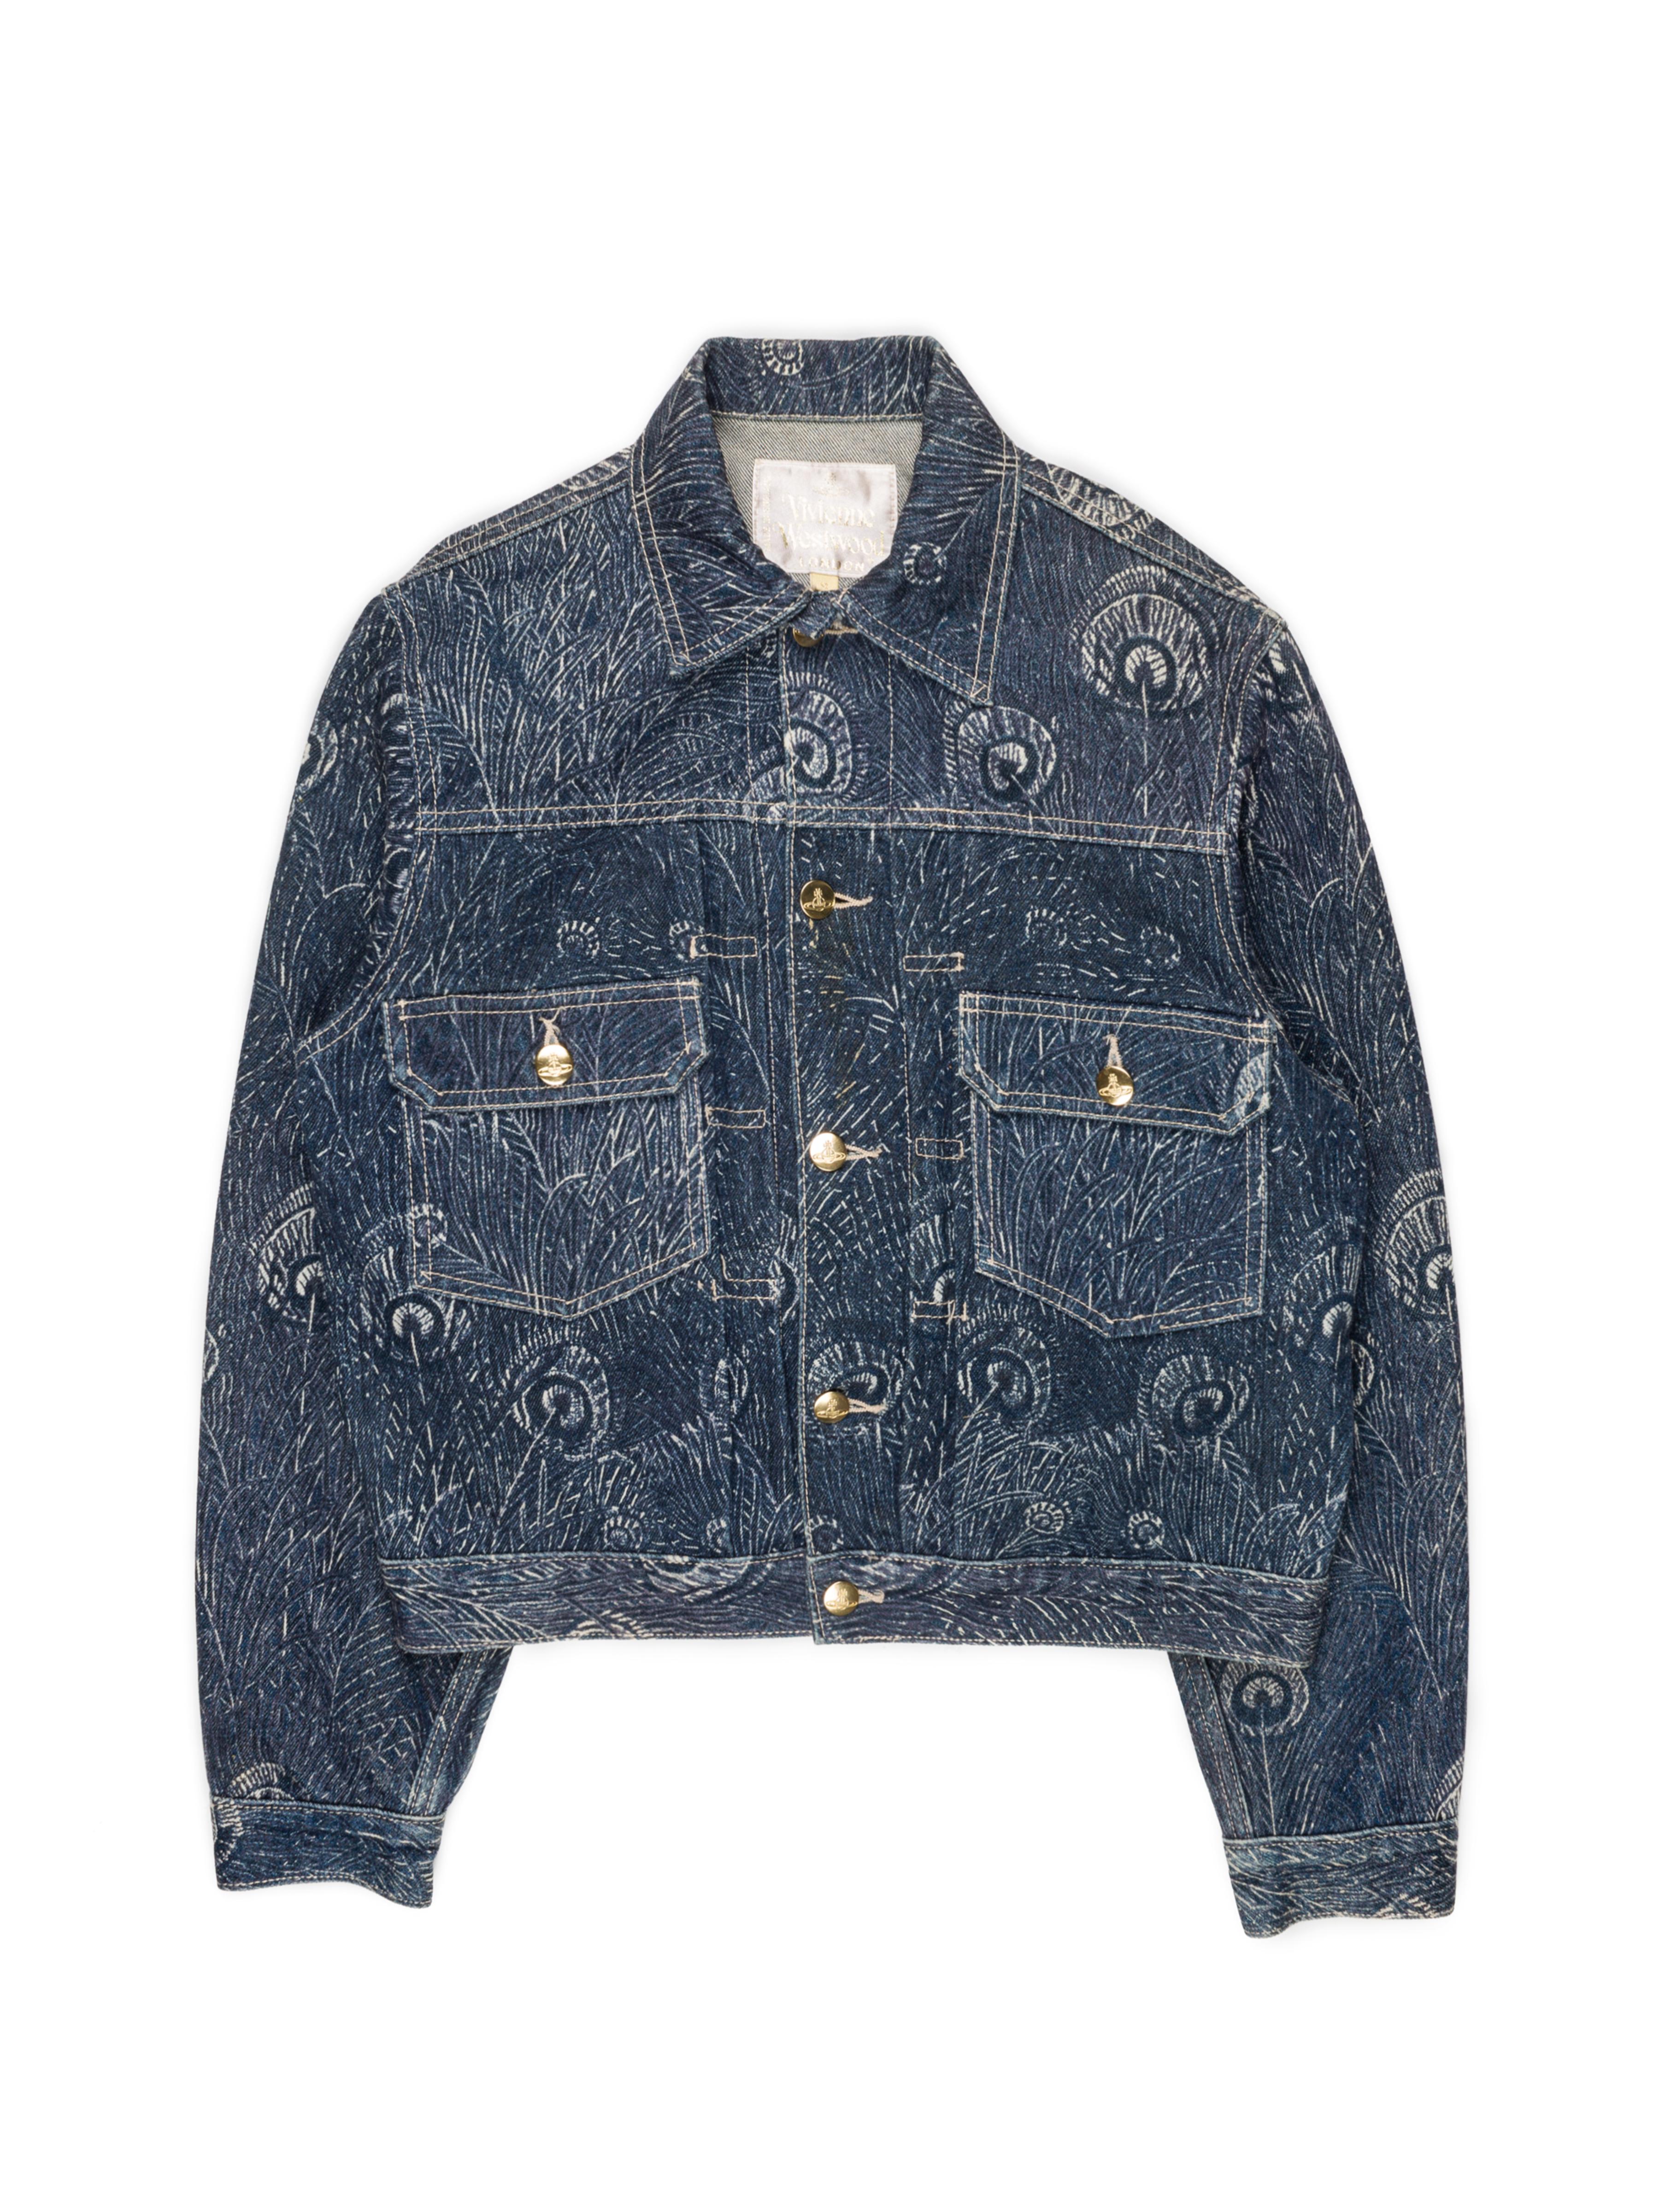 Vivienne Westwood AW1994 Peacock Trucker Jacket In Good Condition In Beverly Hills, CA